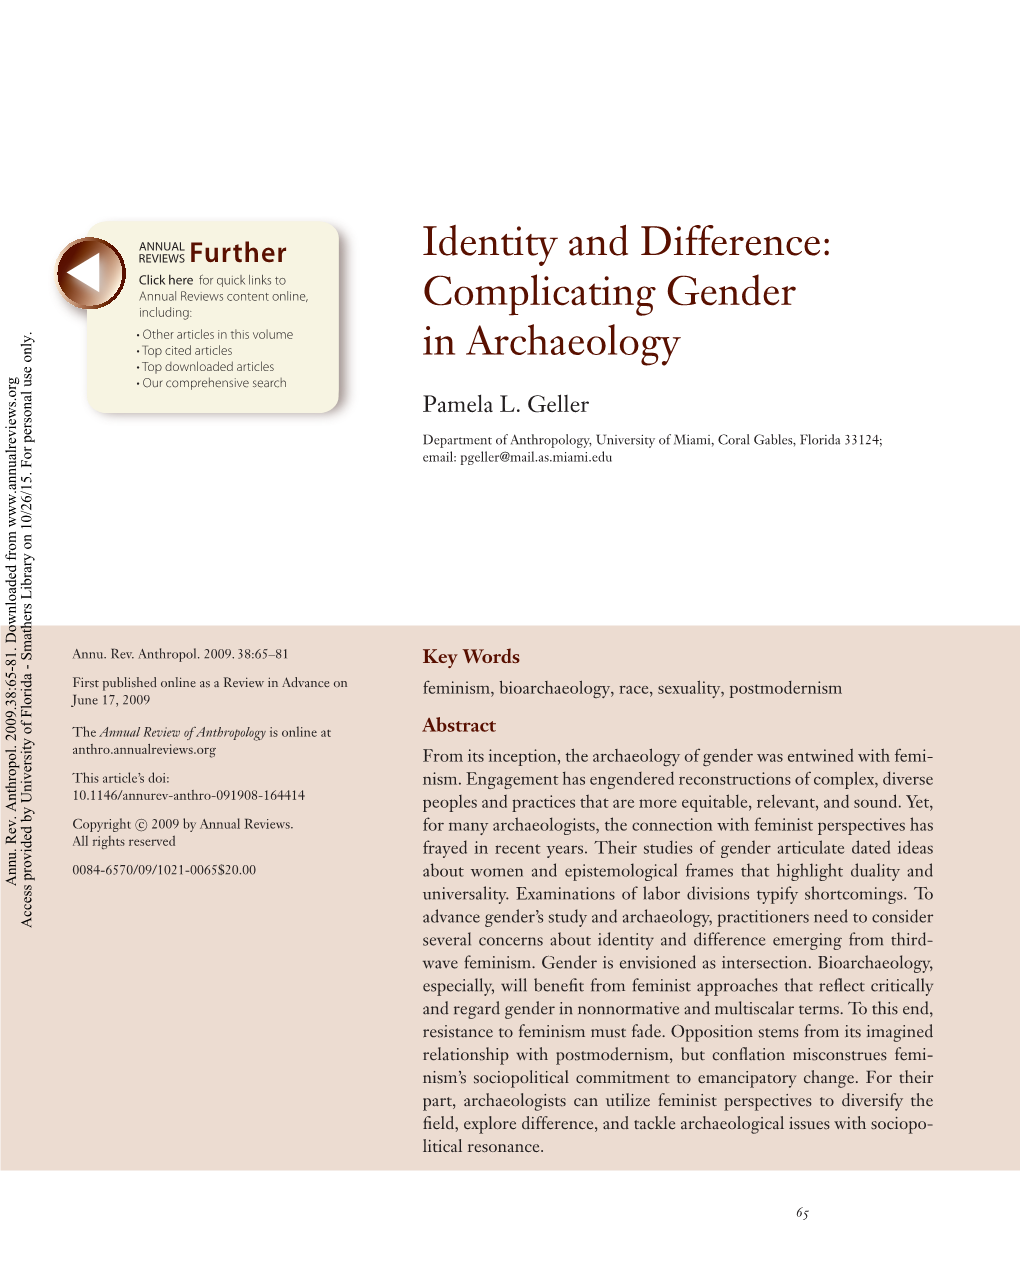 Identity and Difference: Complicating Gender in Archaeology